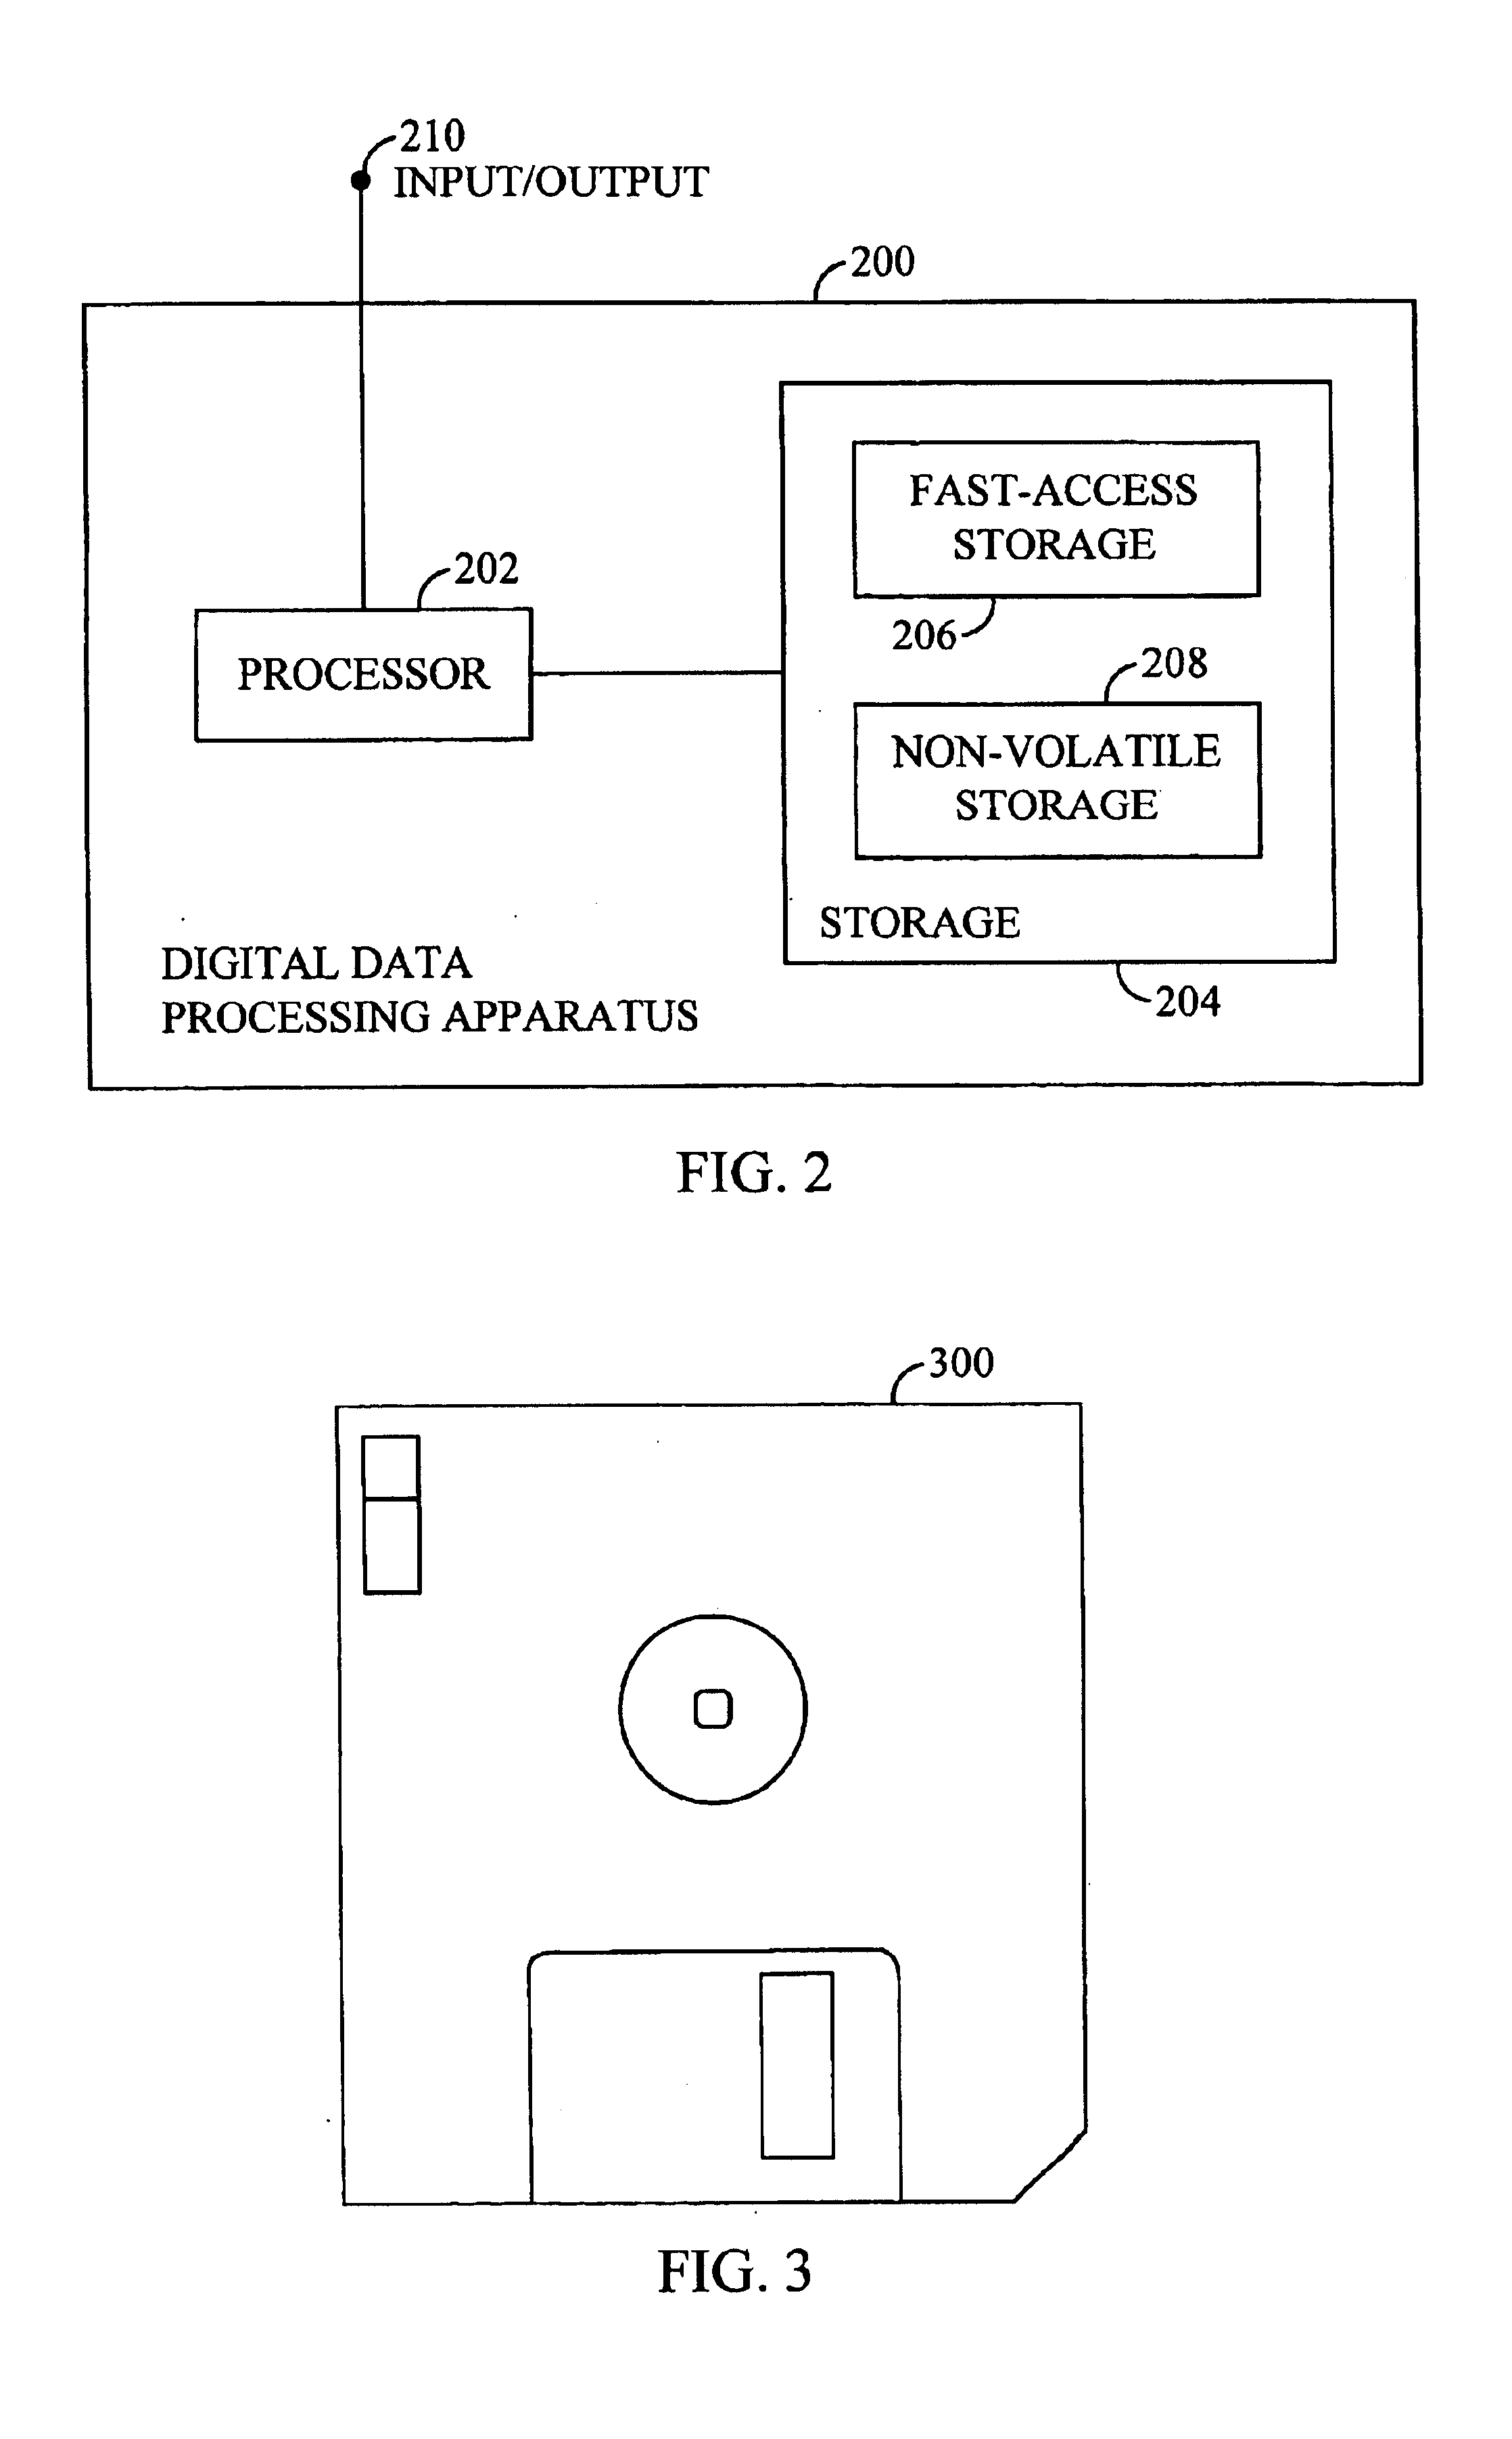 Battery monitoring system with low power and end-of-life messaging and shutdown